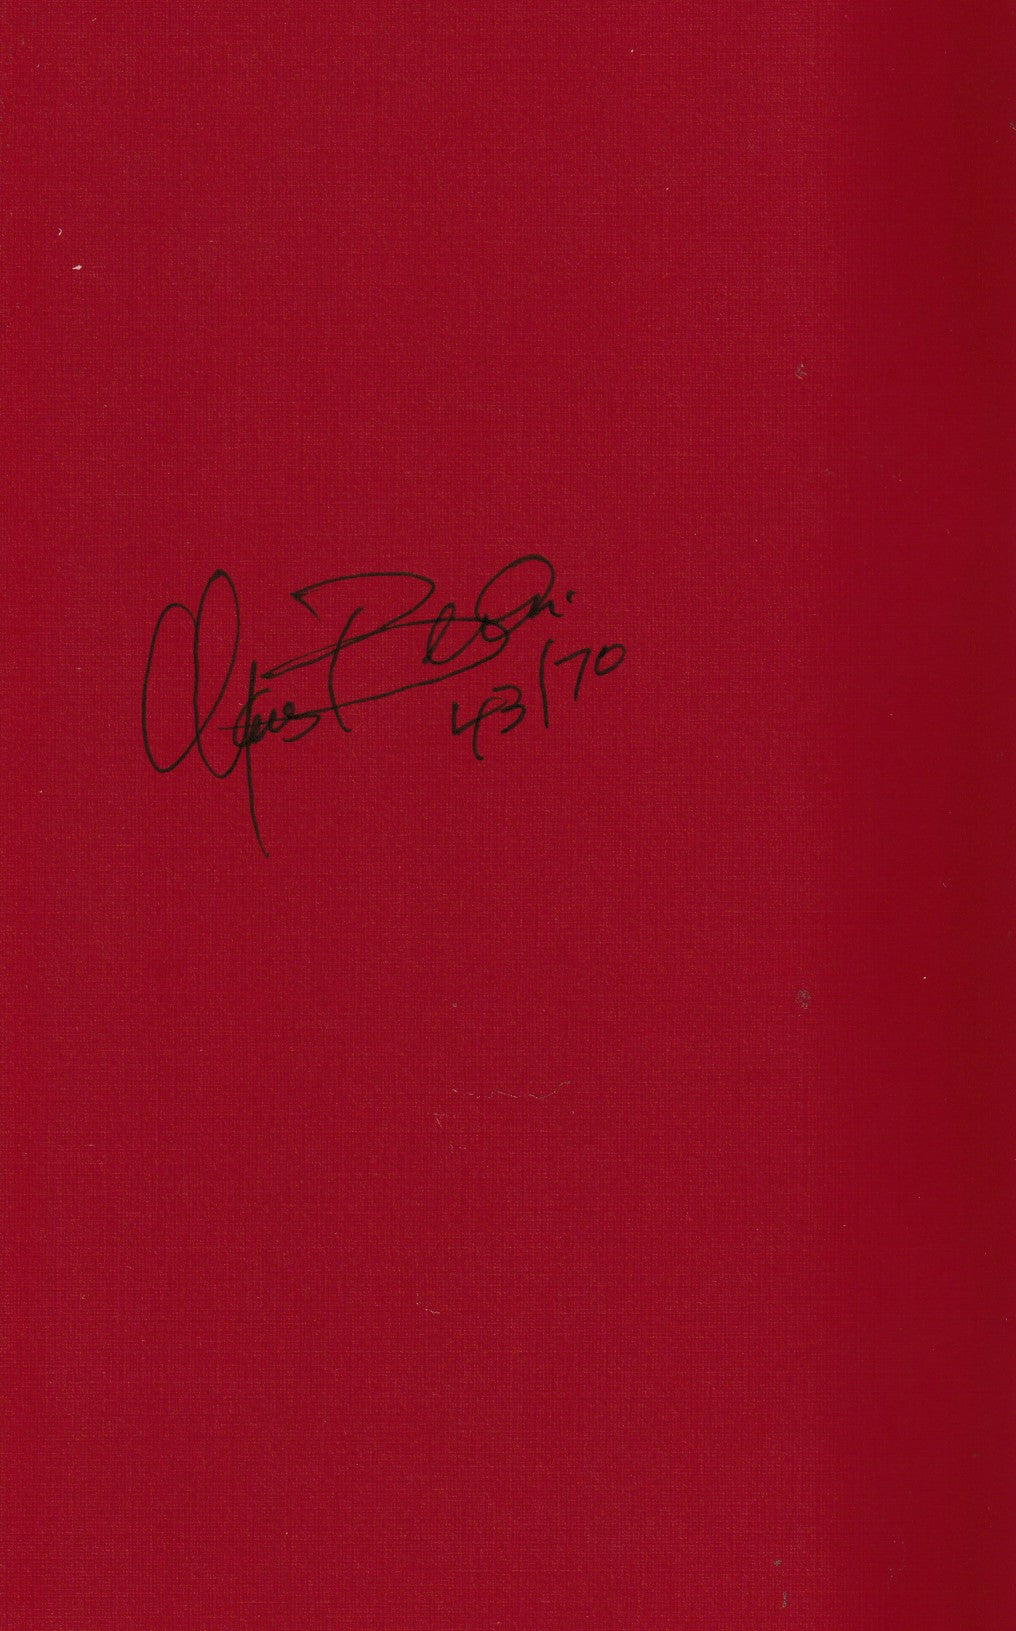 Wormwood Review 122-123: Deluxe Issue Signed by Charles Bukowski (43/70)